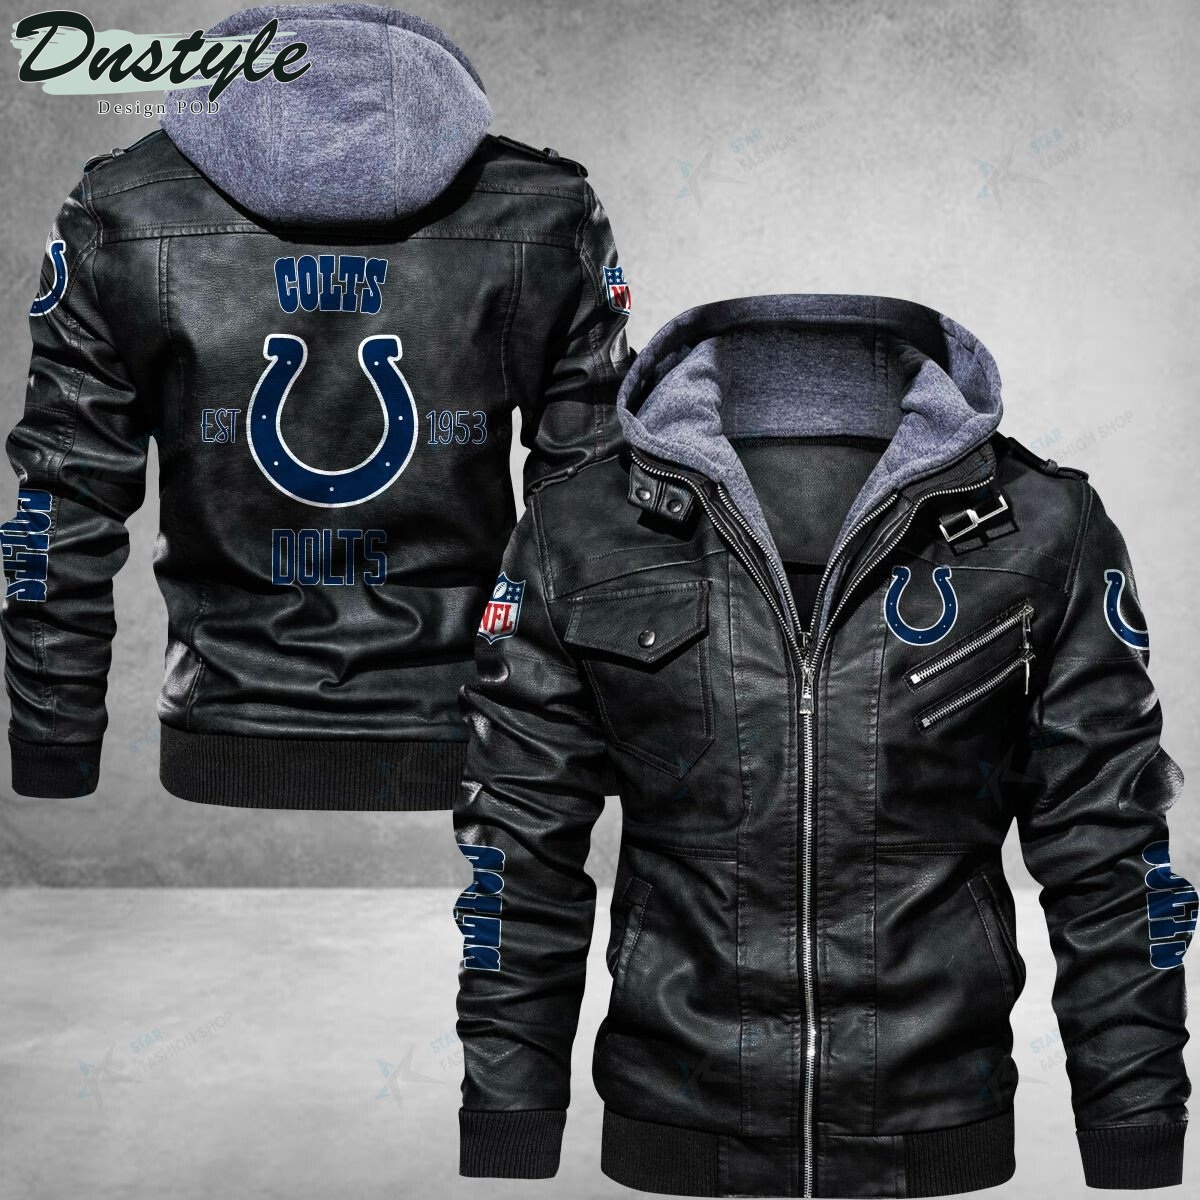 Indianapolis Colts Dolts Leather Jacket